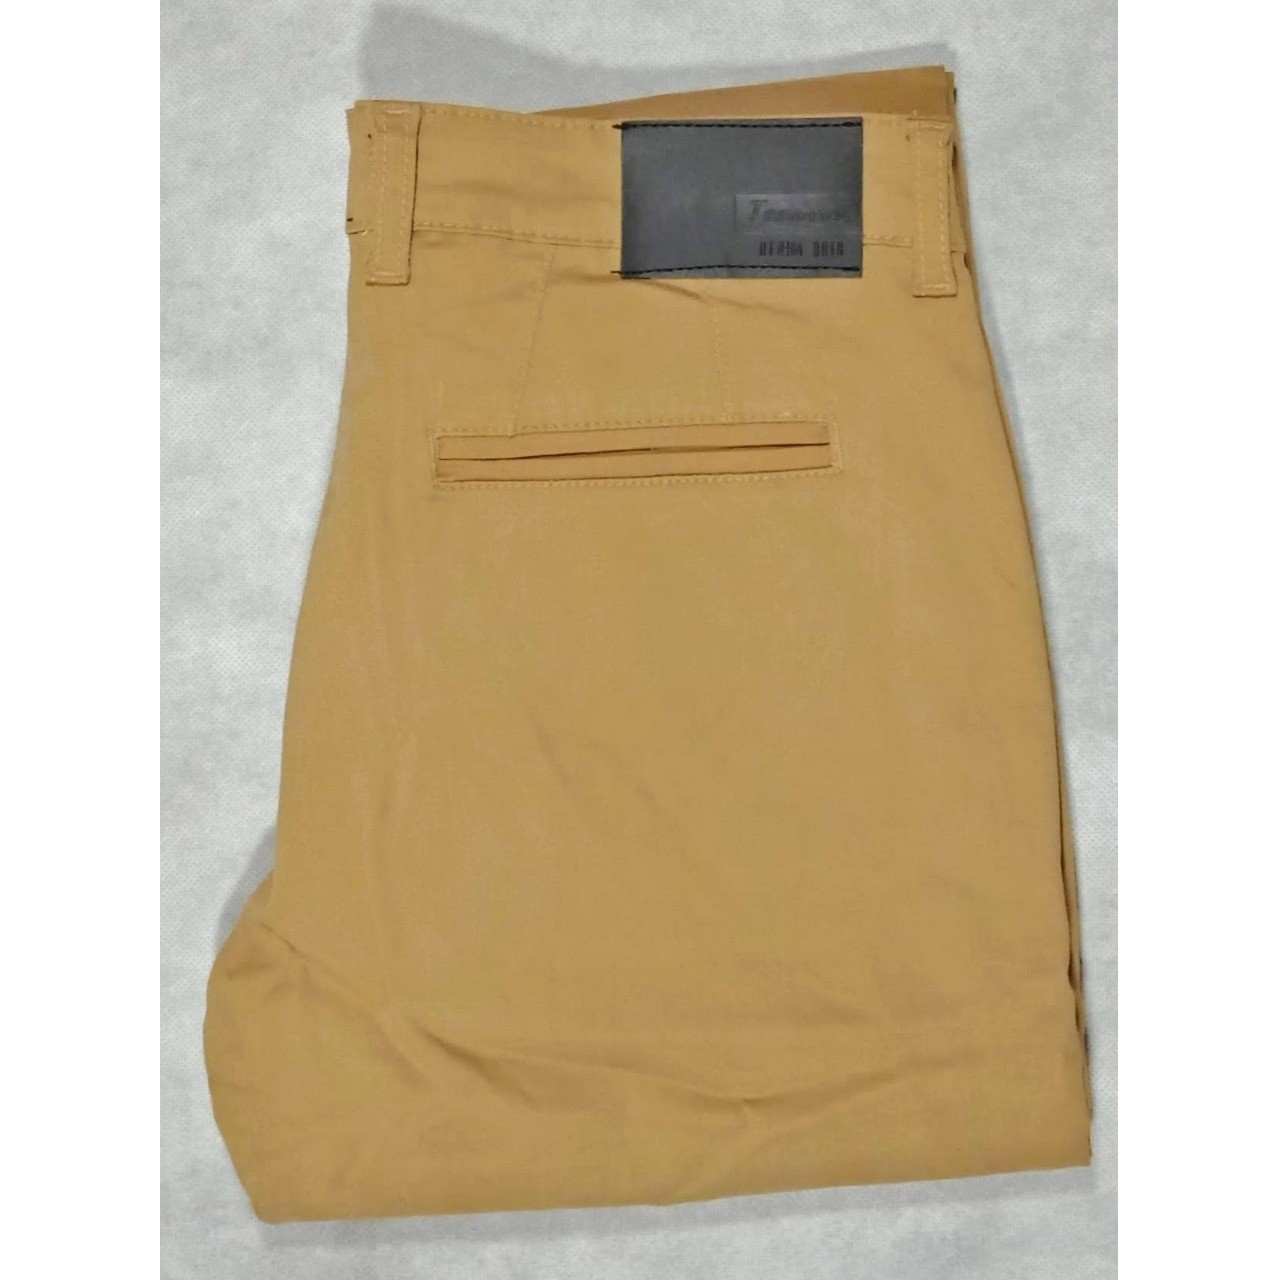 Khaki Cotton Pant In Stretchable Fabric For Men